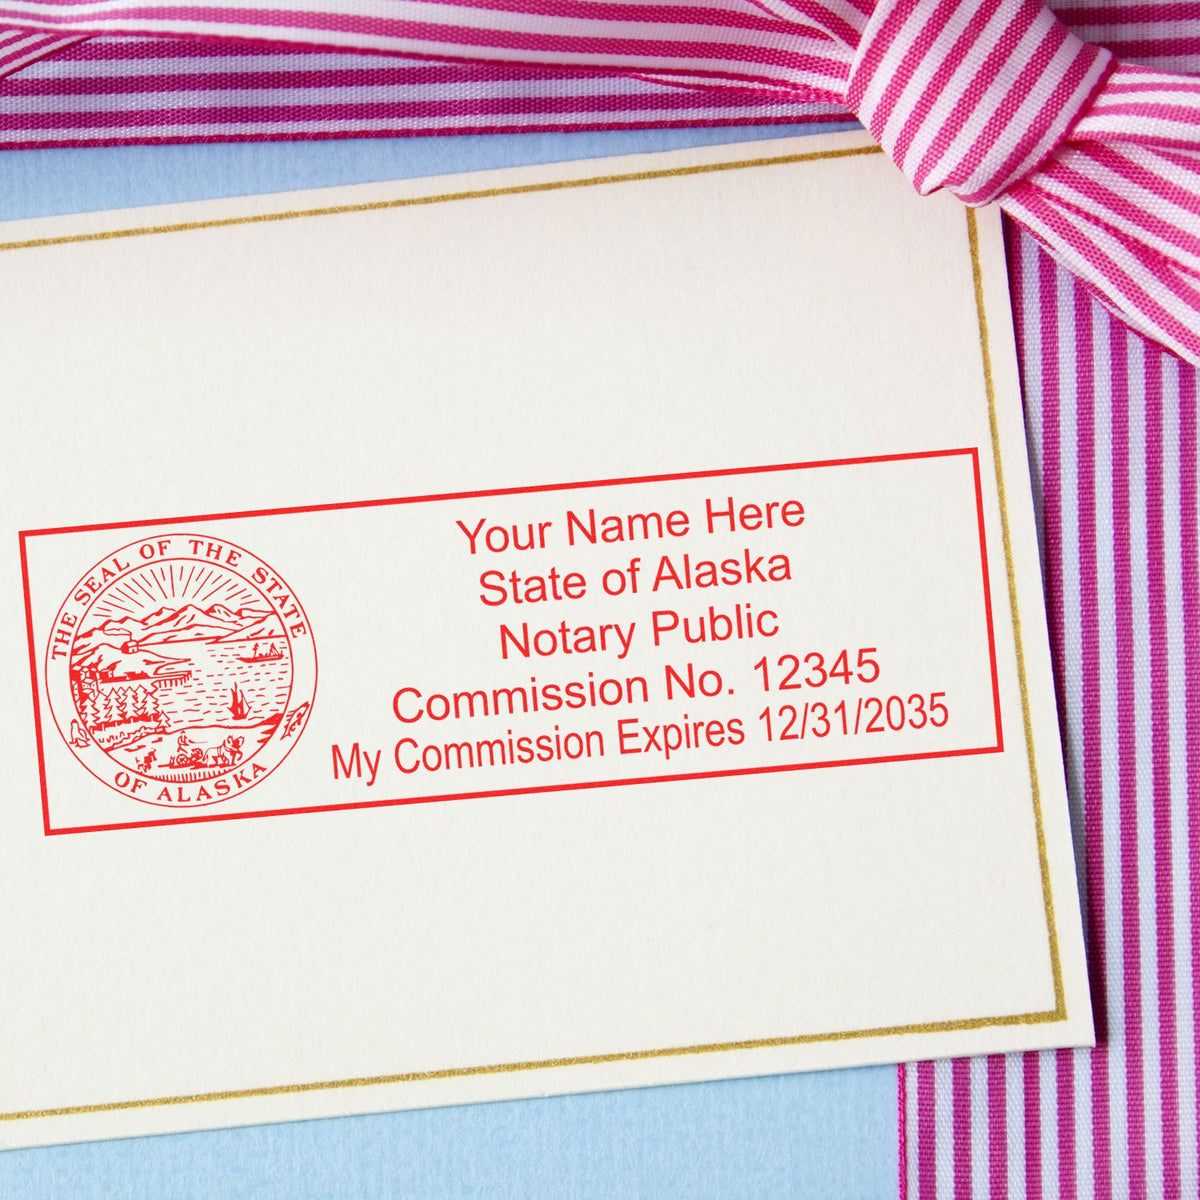 A stamped impression of the Wooden Handle Alaska State Seal Notary Public Stamp in this stylish lifestyle photo, setting the tone for a unique and personalized product.